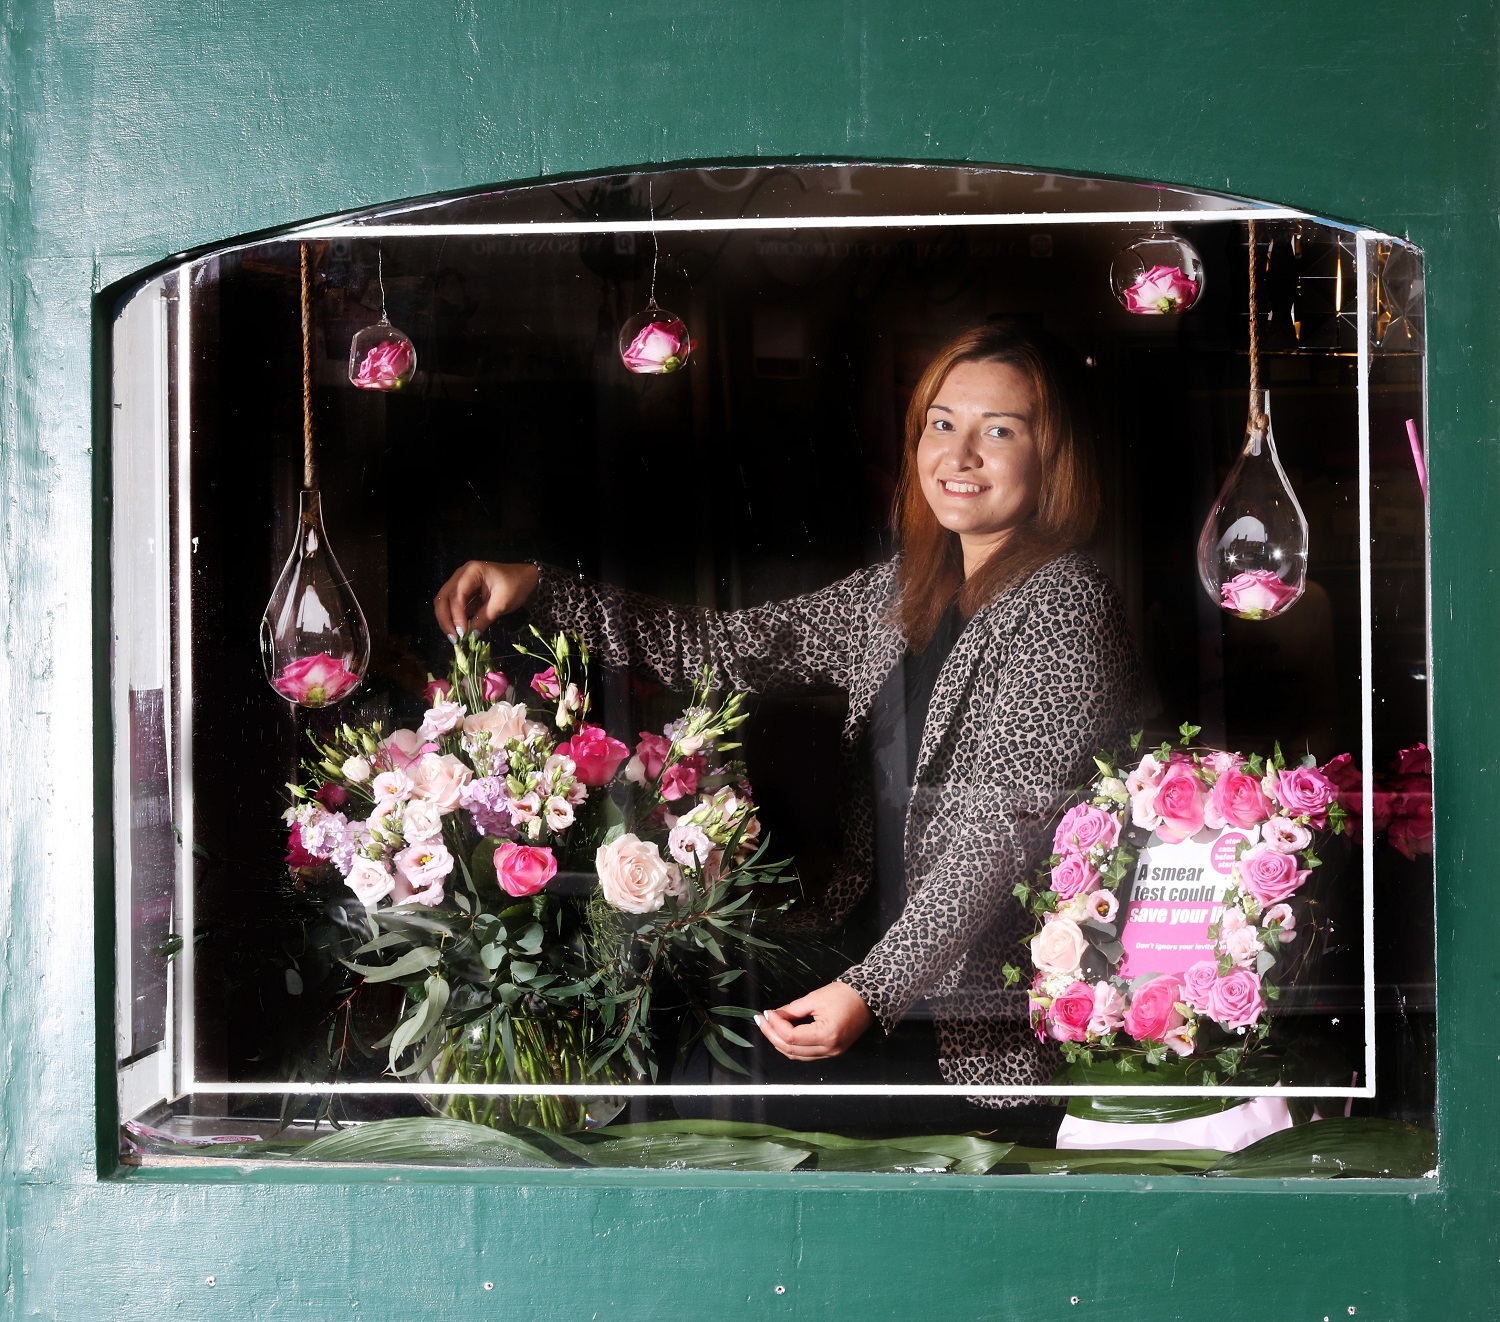 Cervical Cancer Campaign.
Window display in Azalea florist in Aberdeen. Pictured is florist Nicola Duguid.

Picture Simon Price